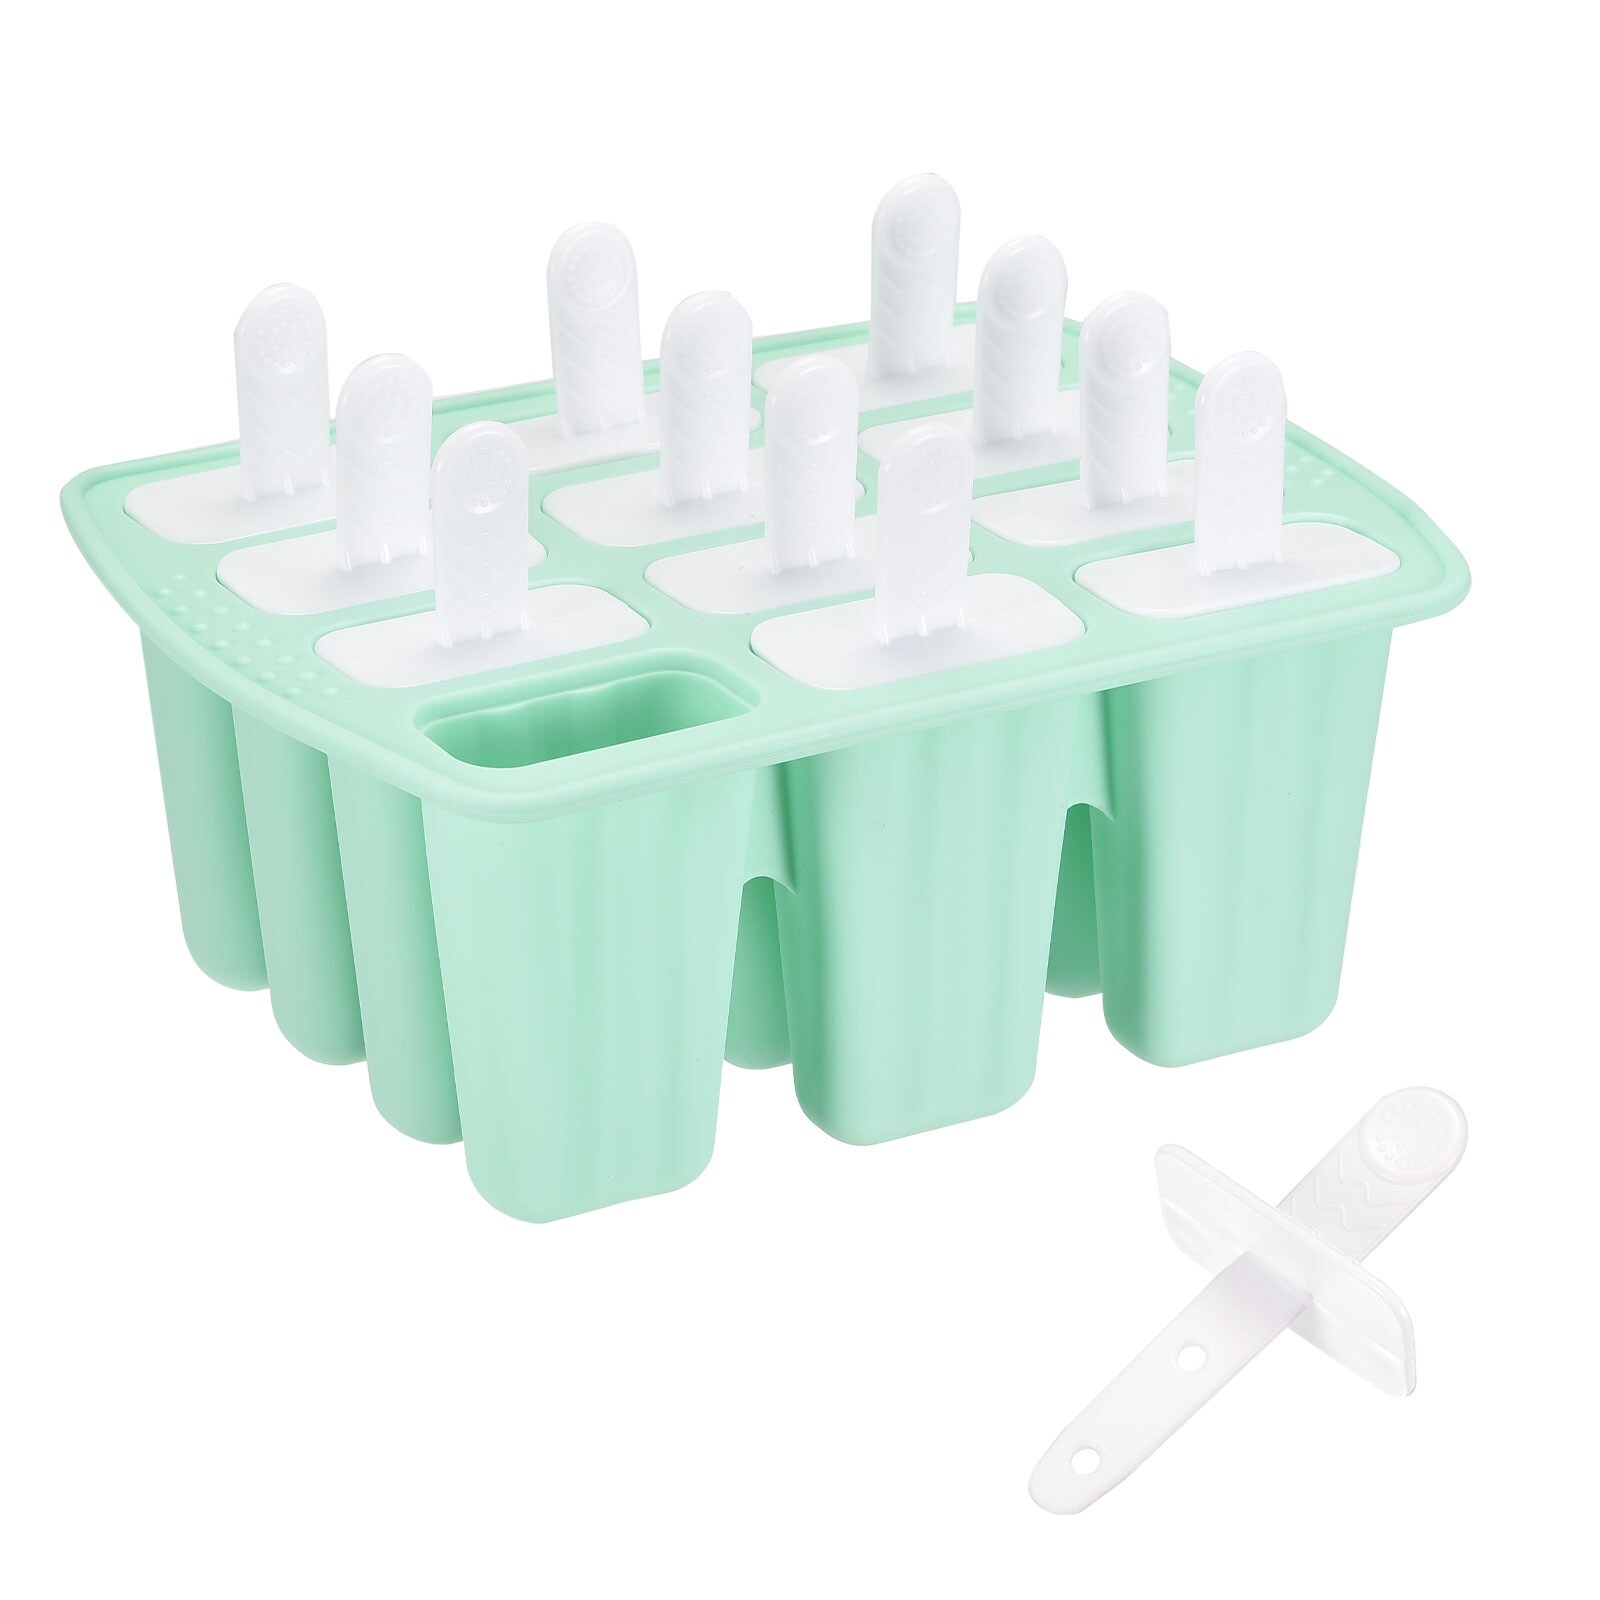 Epare Popsicle Molds - Silicone Homemade Ice Pop Maker - Bed Bath & Beyond  - 31816056